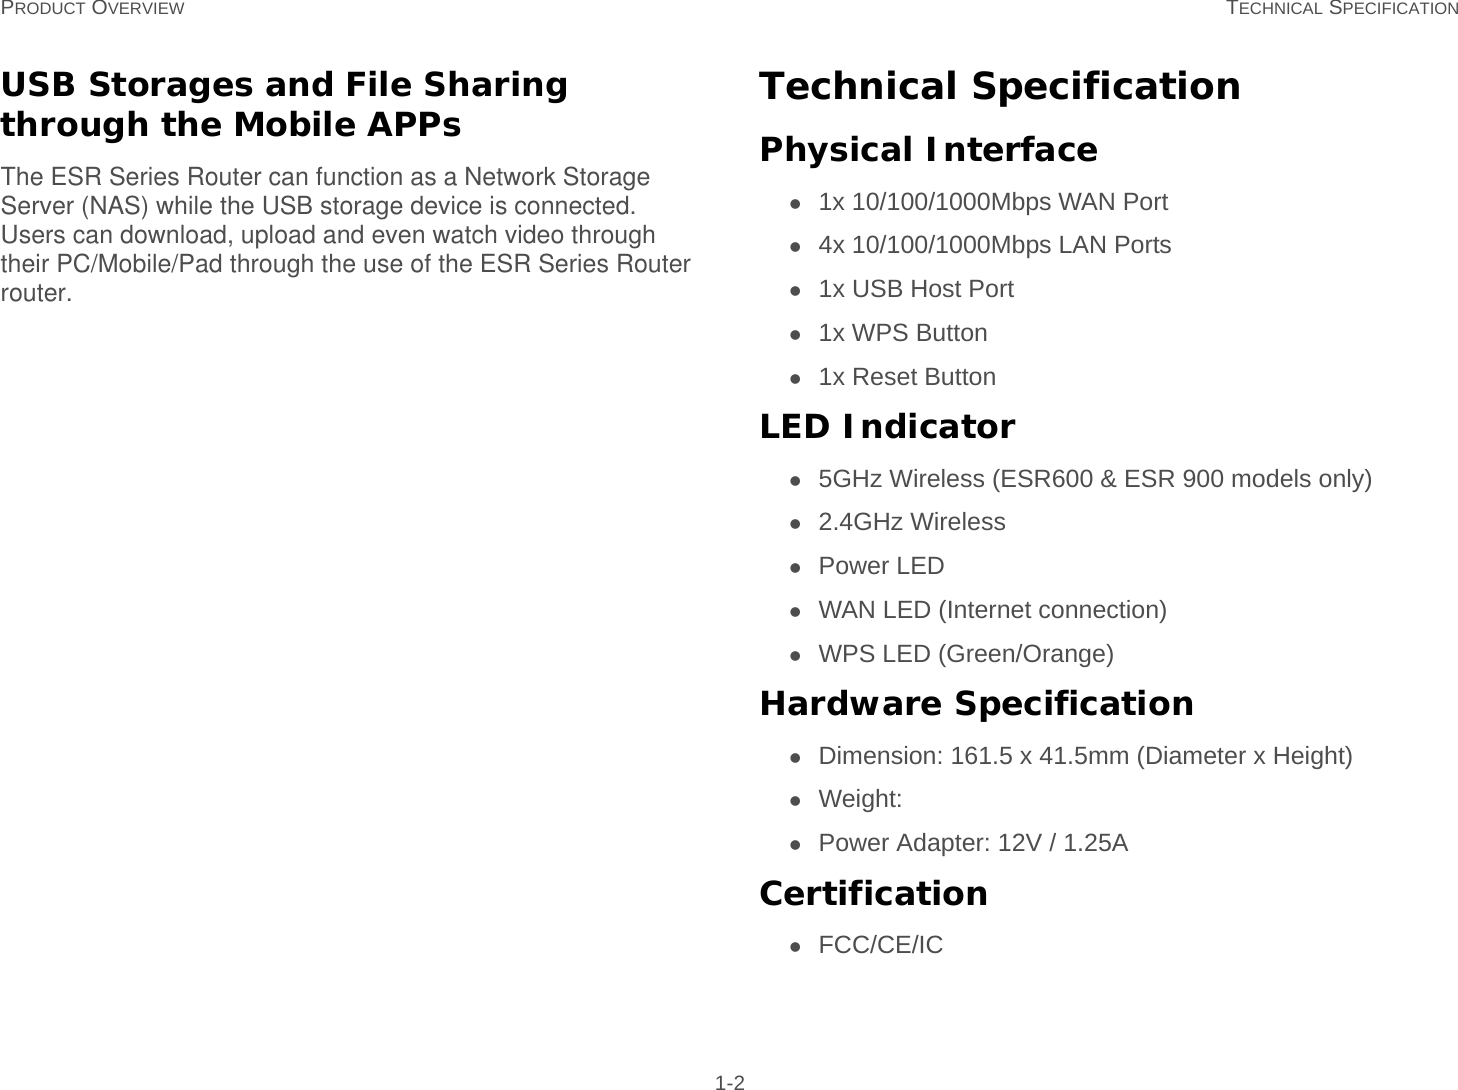 PRODUCT OVERVIEW TECHNICAL SPECIFICATION 1-2USB Storages and File Sharing through the Mobile APPsThe ESR Series Router can function as a Network Storage Server (NAS) while the USB storage device is connected. Users can download, upload and even watch video through their PC/Mobile/Pad through the use of the ESR Series Router router.Technical SpecificationPhysical Interface1x 10/100/1000Mbps WAN Port4x 10/100/1000Mbps LAN Ports1x USB Host Port1x WPS Button1x Reset ButtonLED Indicator5GHz Wireless (ESR600 &amp; ESR 900 models only)2.4GHz WirelessPower LEDWAN LED (Internet connection)WPS LED (Green/Orange)Hardware SpecificationDimension: 161.5 x 41.5mm (Diameter x Height)Weight:Power Adapter: 12V / 1.25ACertificationFCC/CE/IC